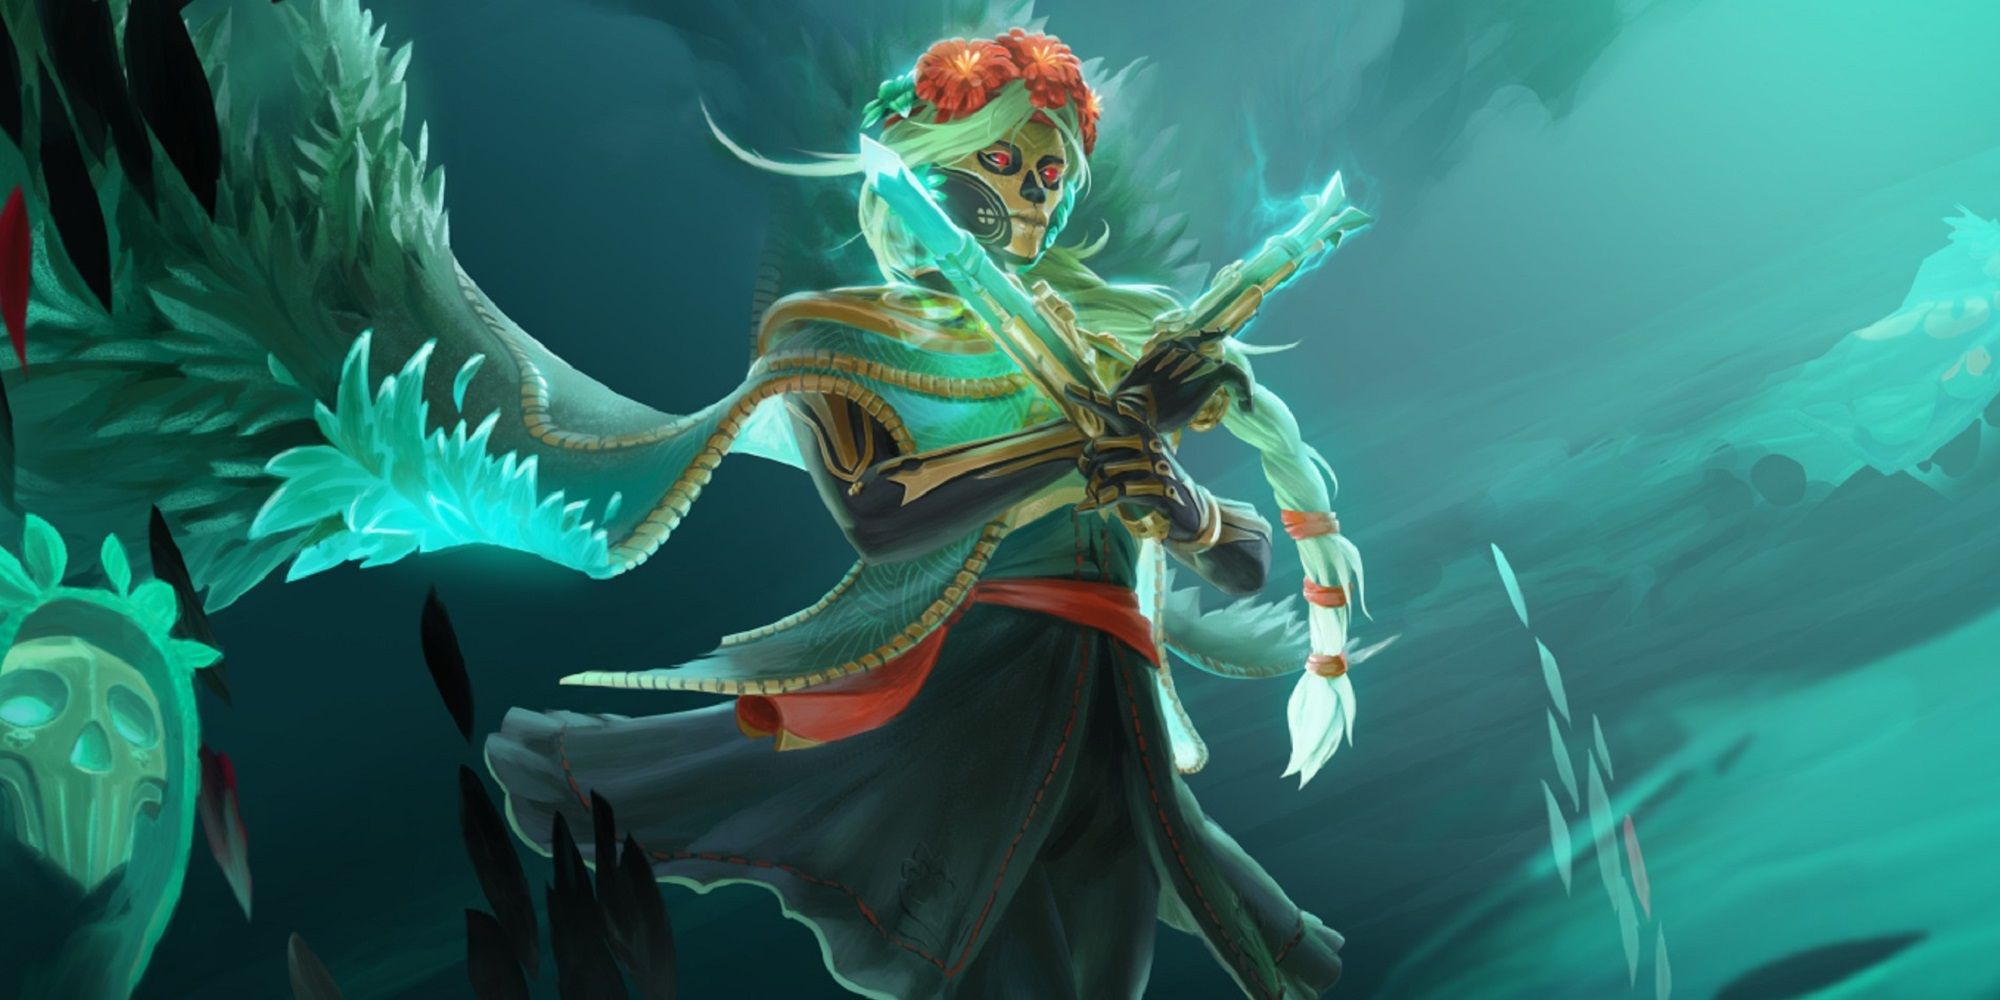 Dota 2 Community Frustrated 7.33.0 patch